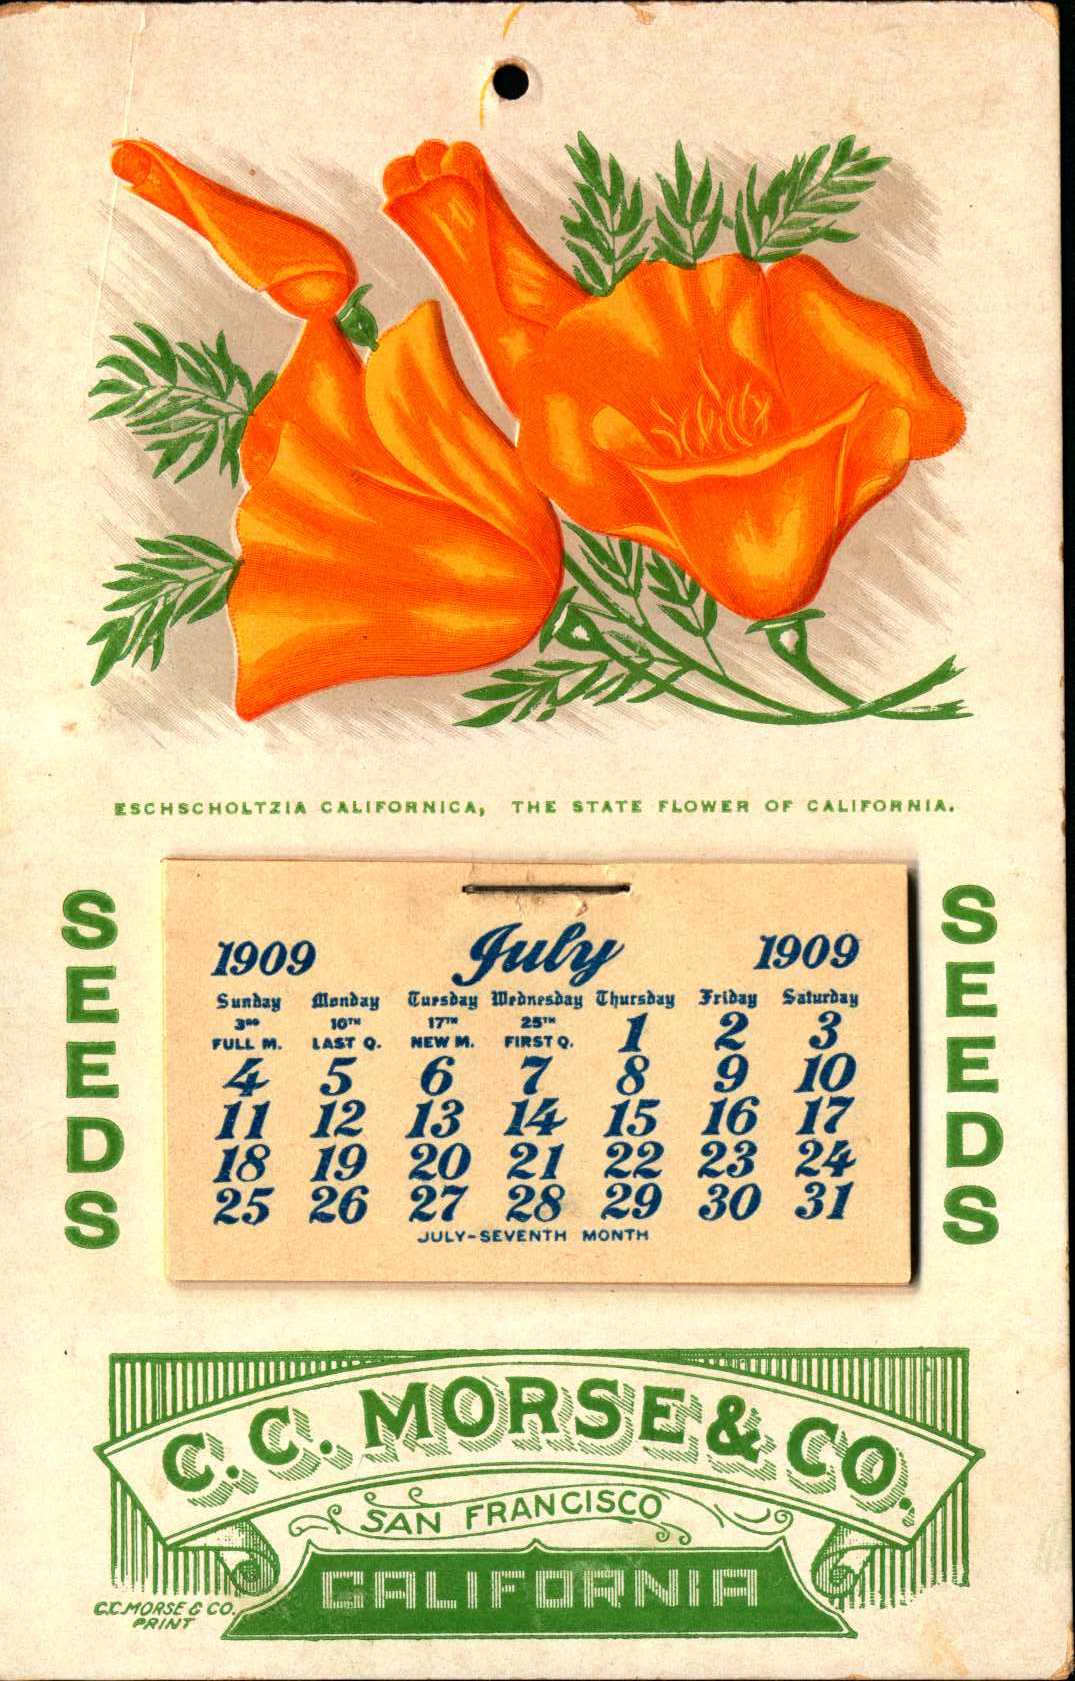 Shows an image of 4 poppies above the calendar and seed company information